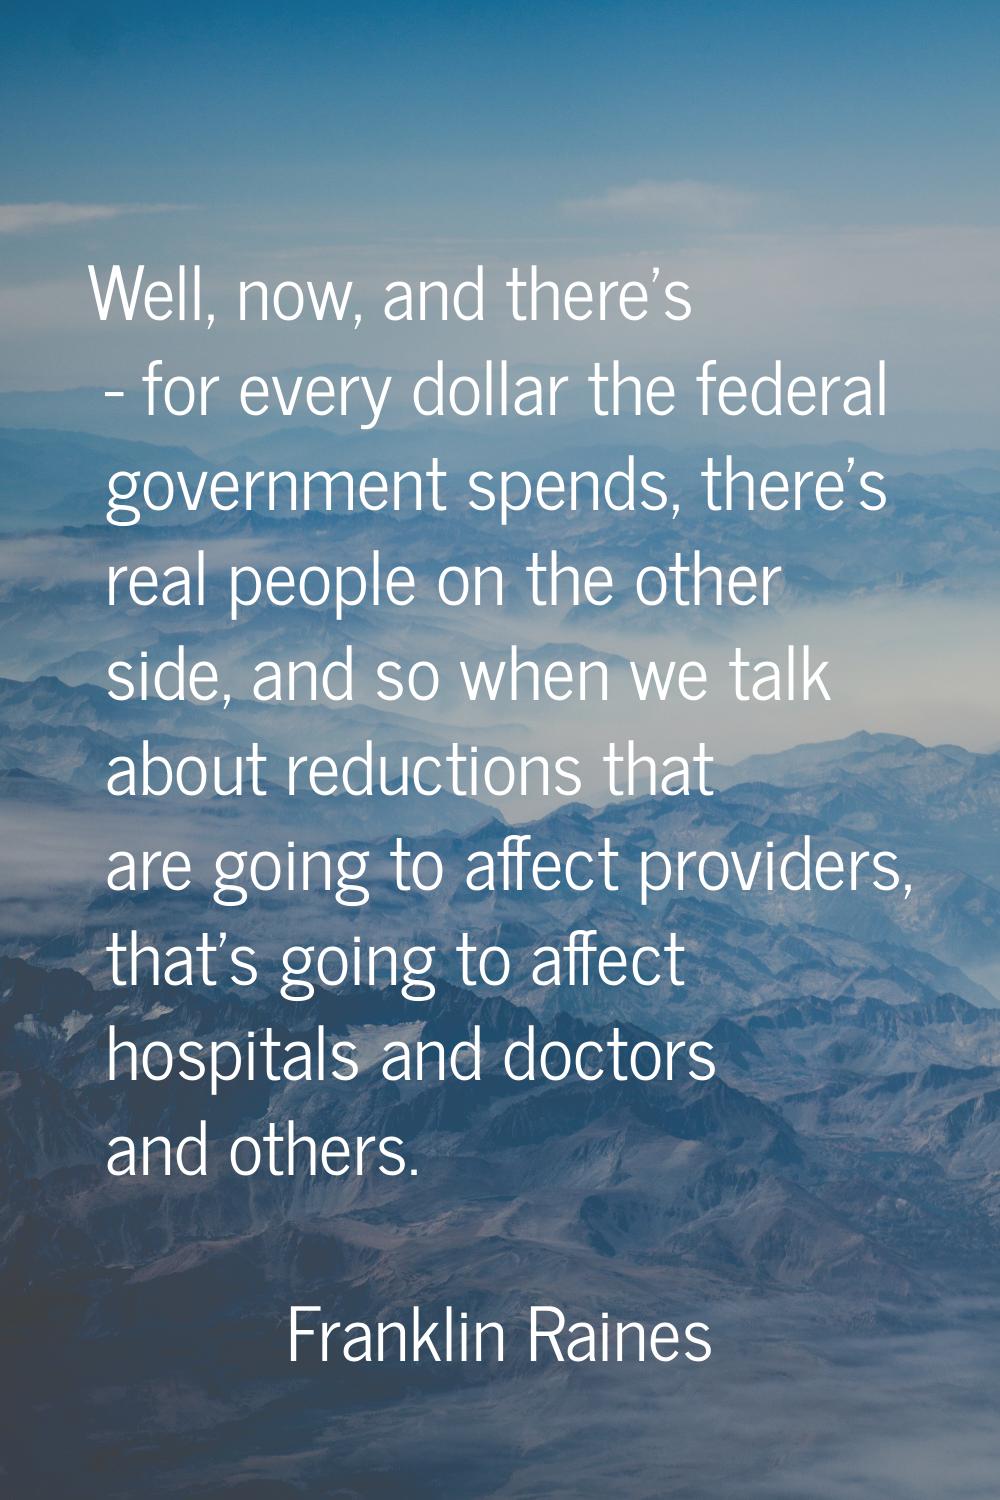 Well, now, and there's - for every dollar the federal government spends, there's real people on the